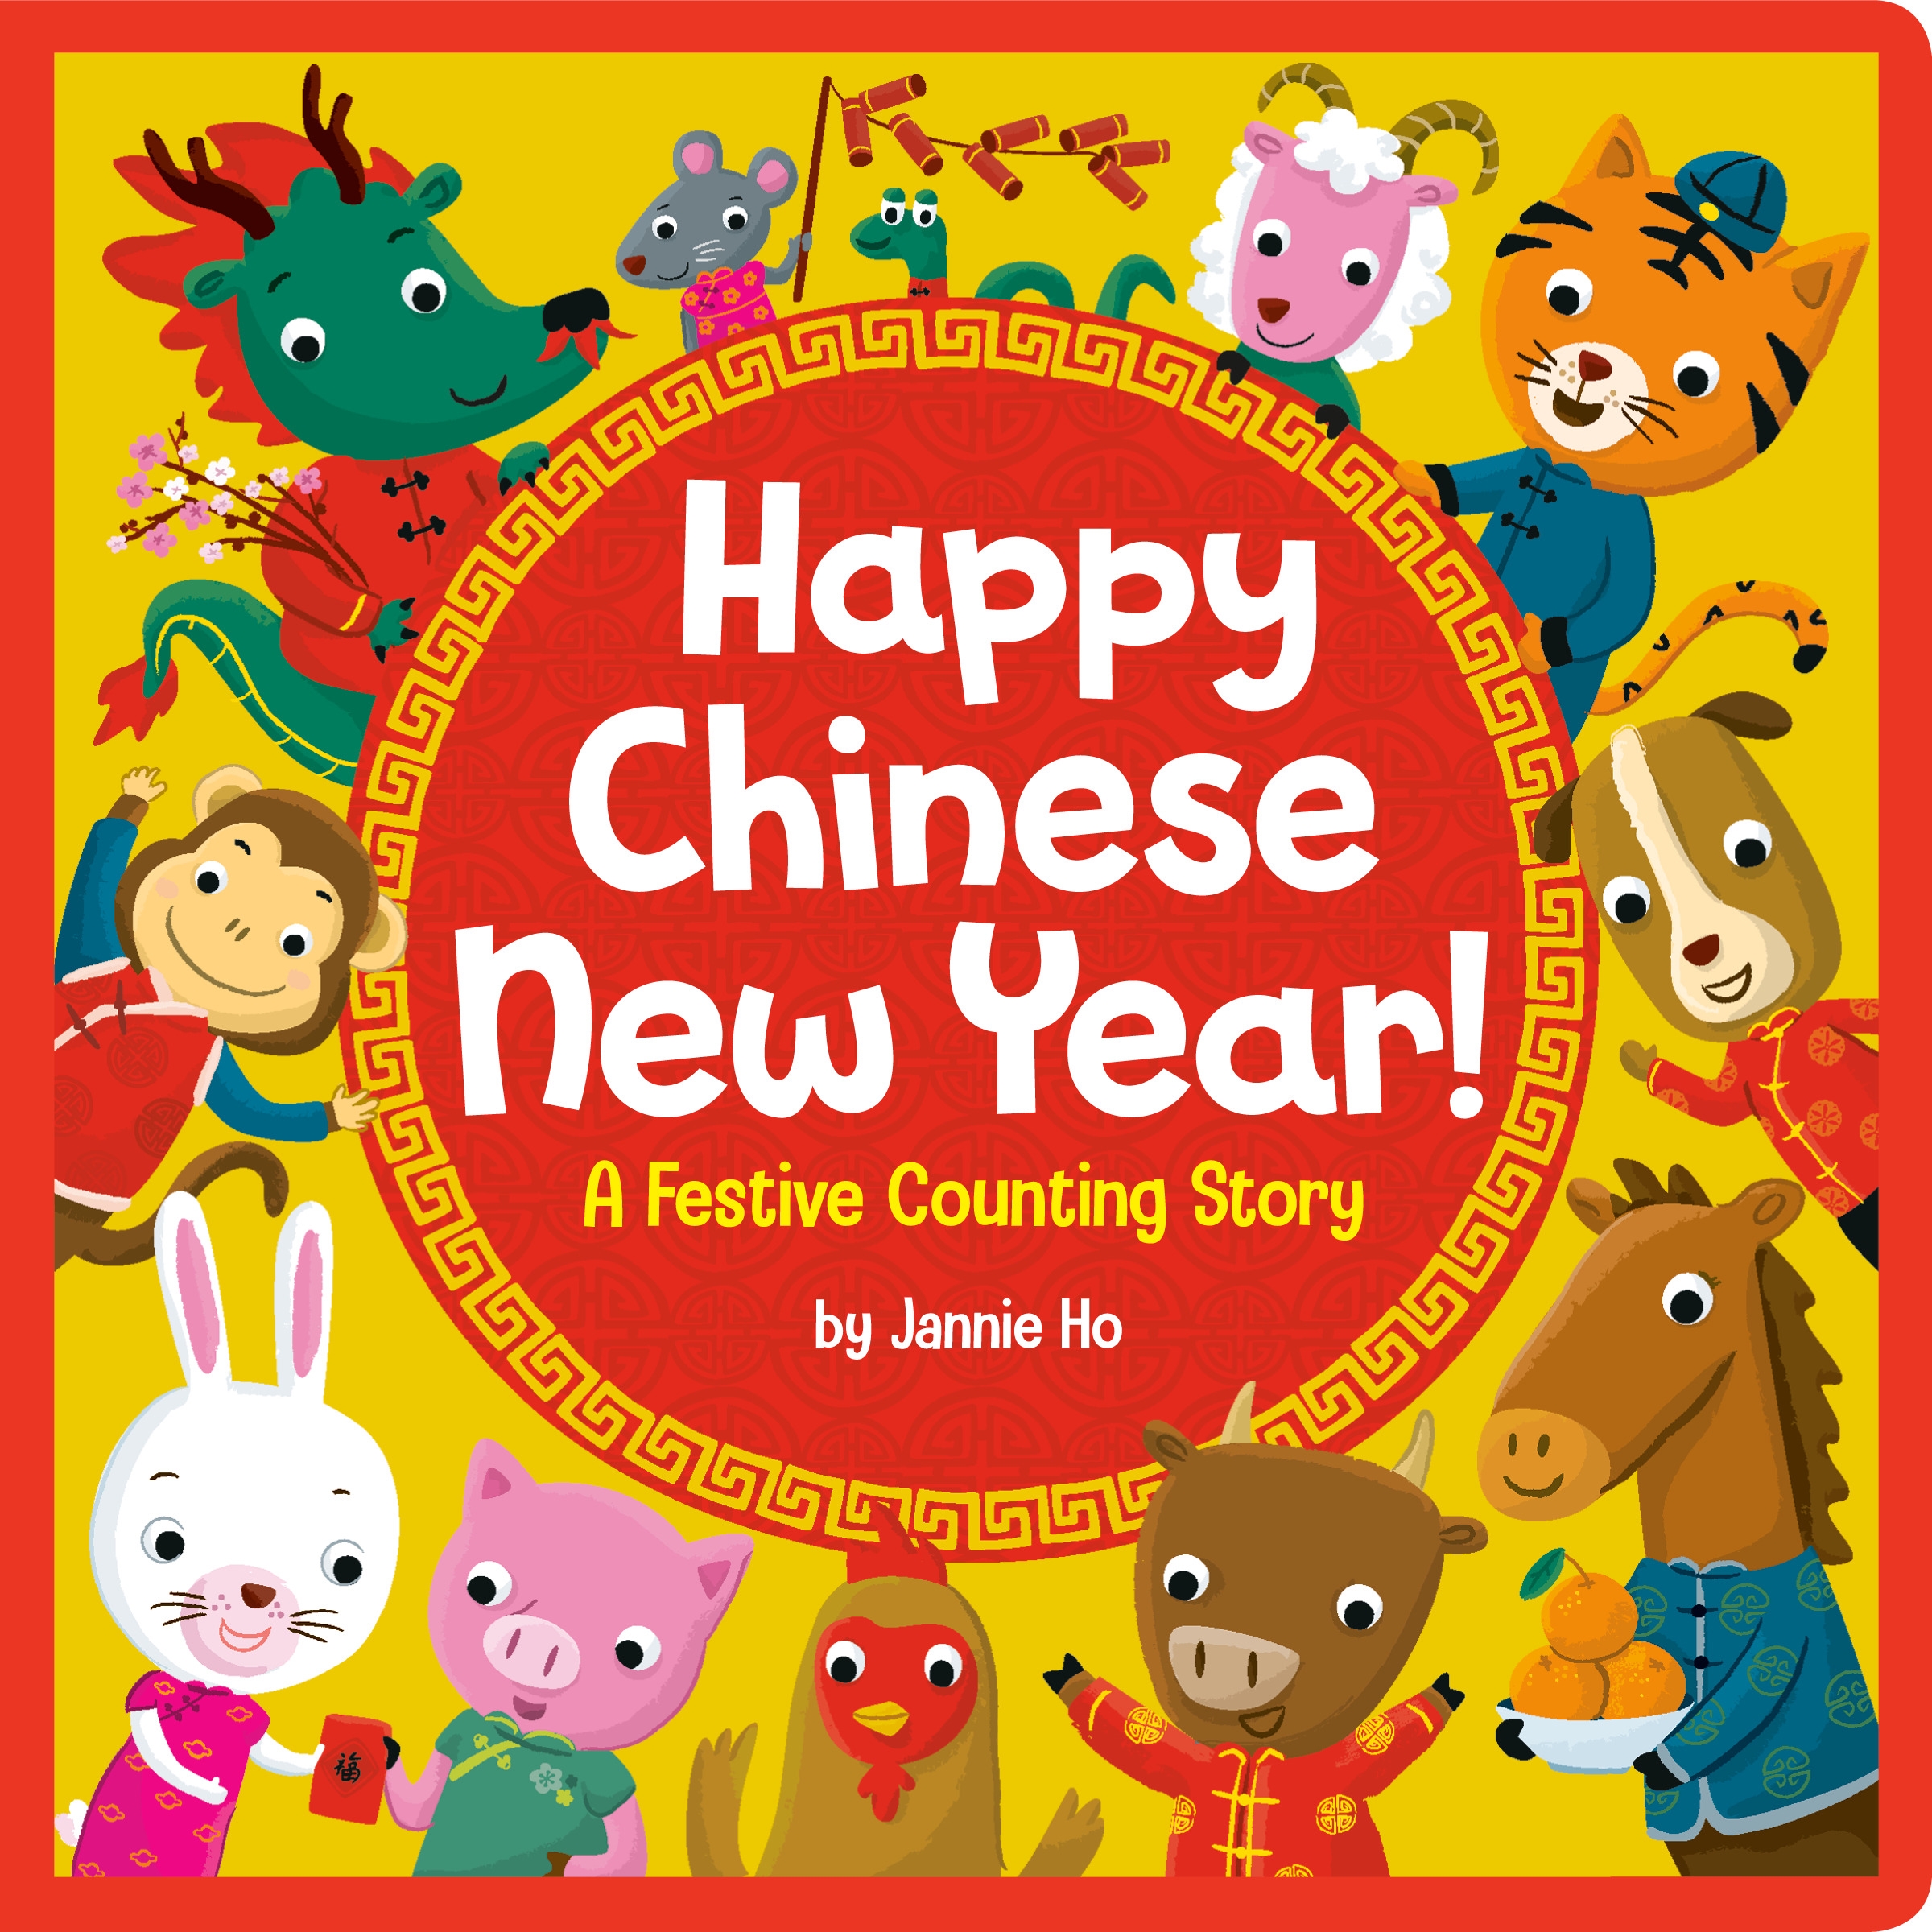 Happy Chinese New Year! by Jannie Ho - Penguin Books New Zealand